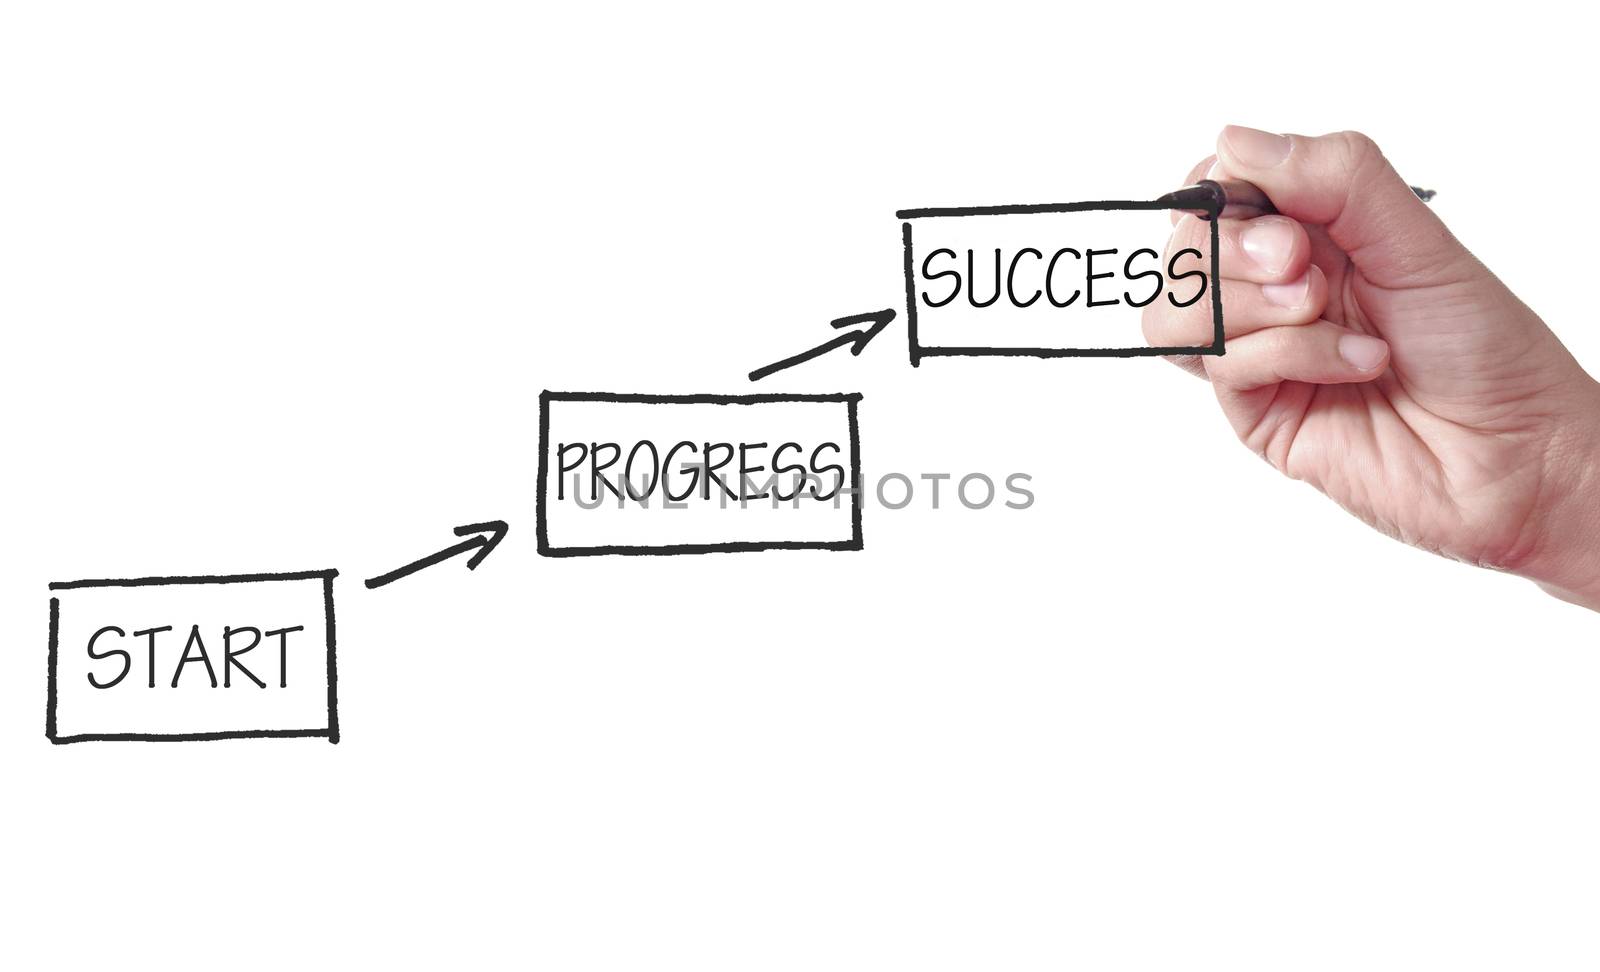 Flow chart diagram leading upwards to success